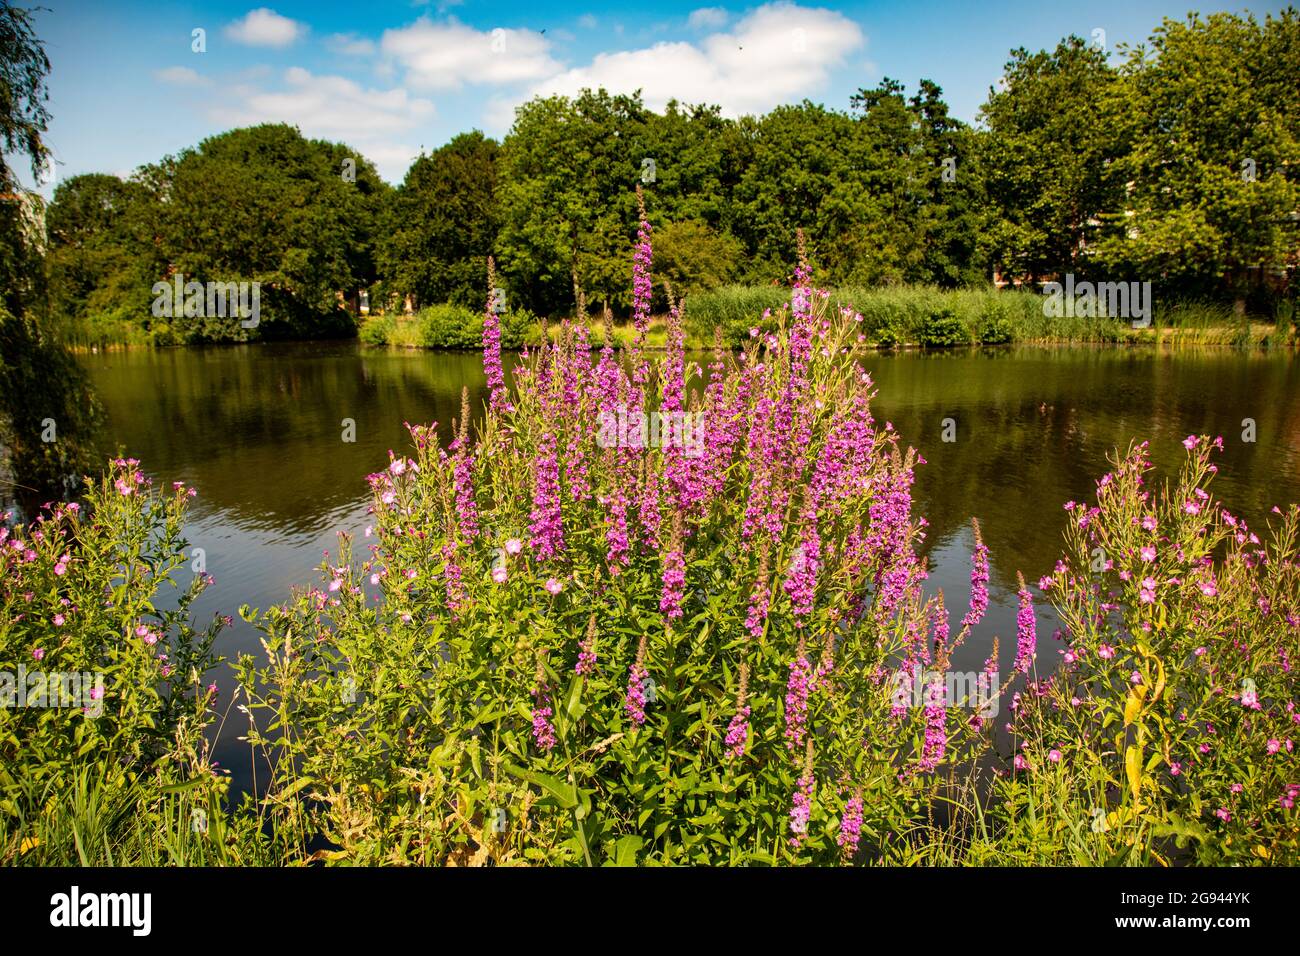 A beautiful bush of flowering purple loosestrife on the edge of a pond Stock Photo